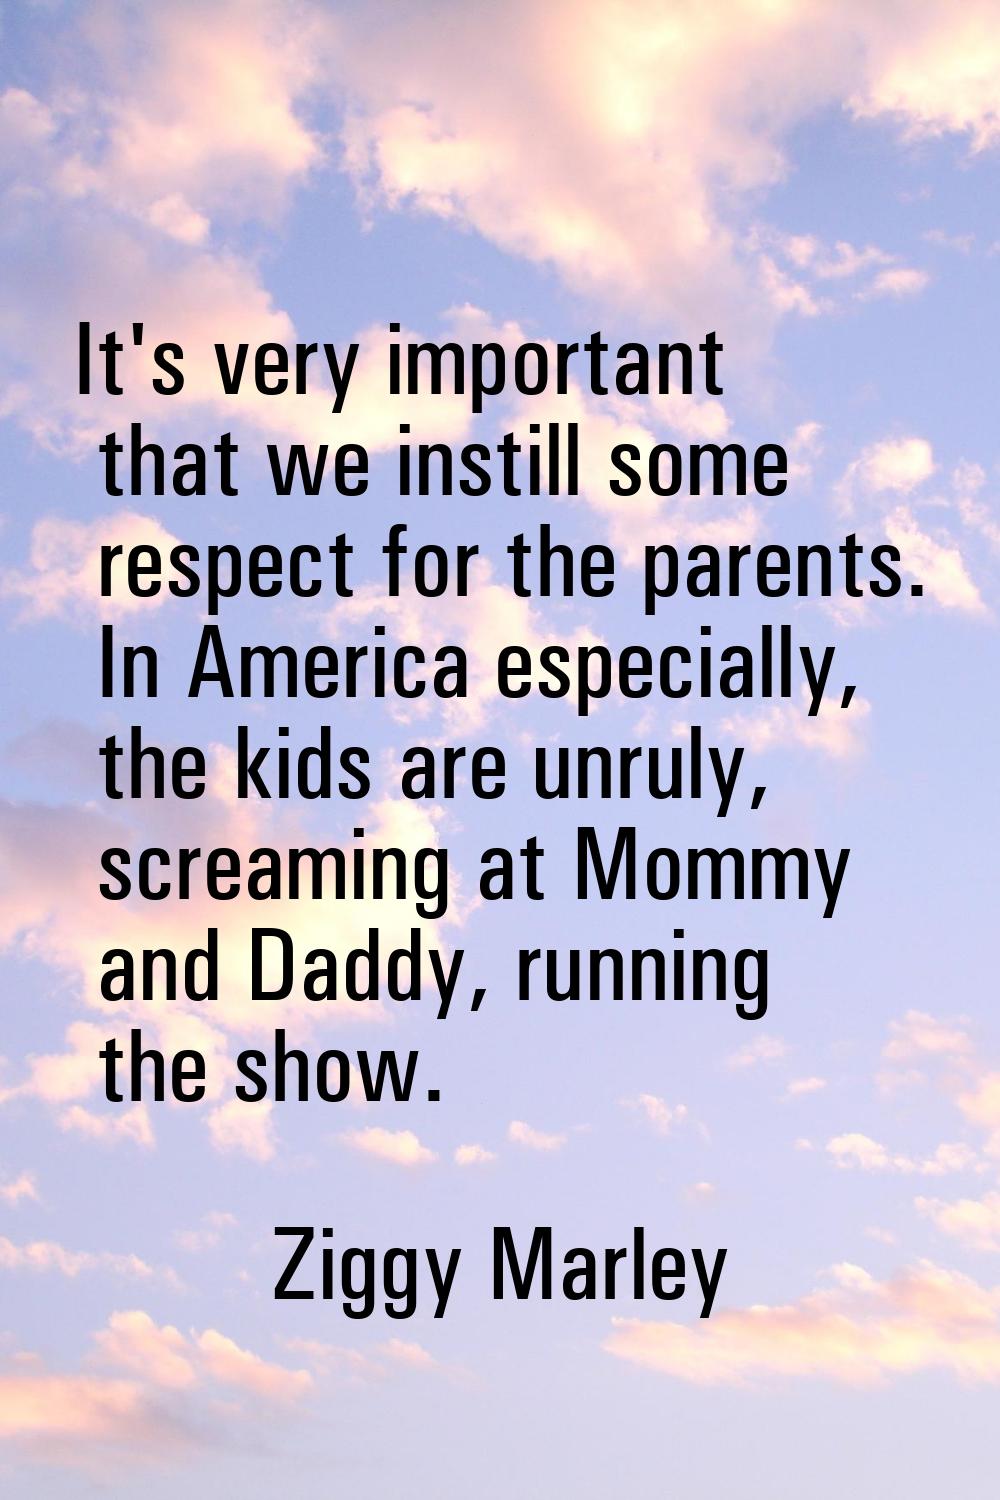 It's very important that we instill some respect for the parents. In America especially, the kids a